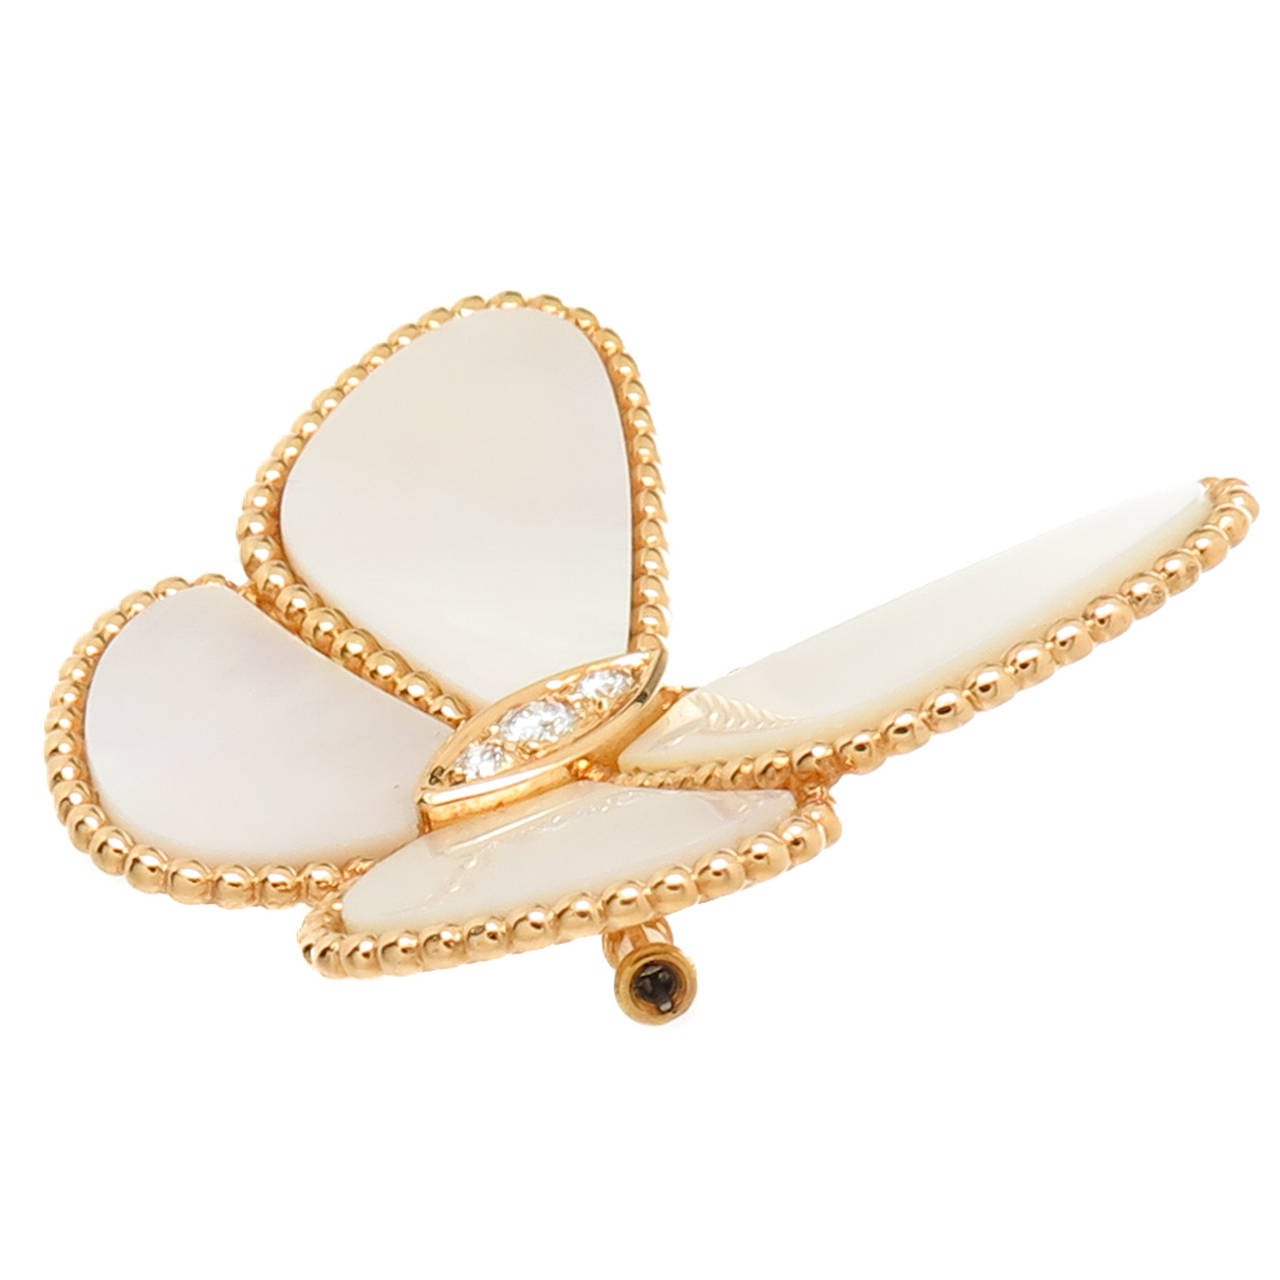 Van Cleef and Arpels 18K Yellow Gold, Diamonds and Mother of Pearl Wings Clip Brooch. Measuring 1 5/8 inch in length and 1 1/2 inch in Height. Signed and Numbered. Can be modified to also wear as a pendant.